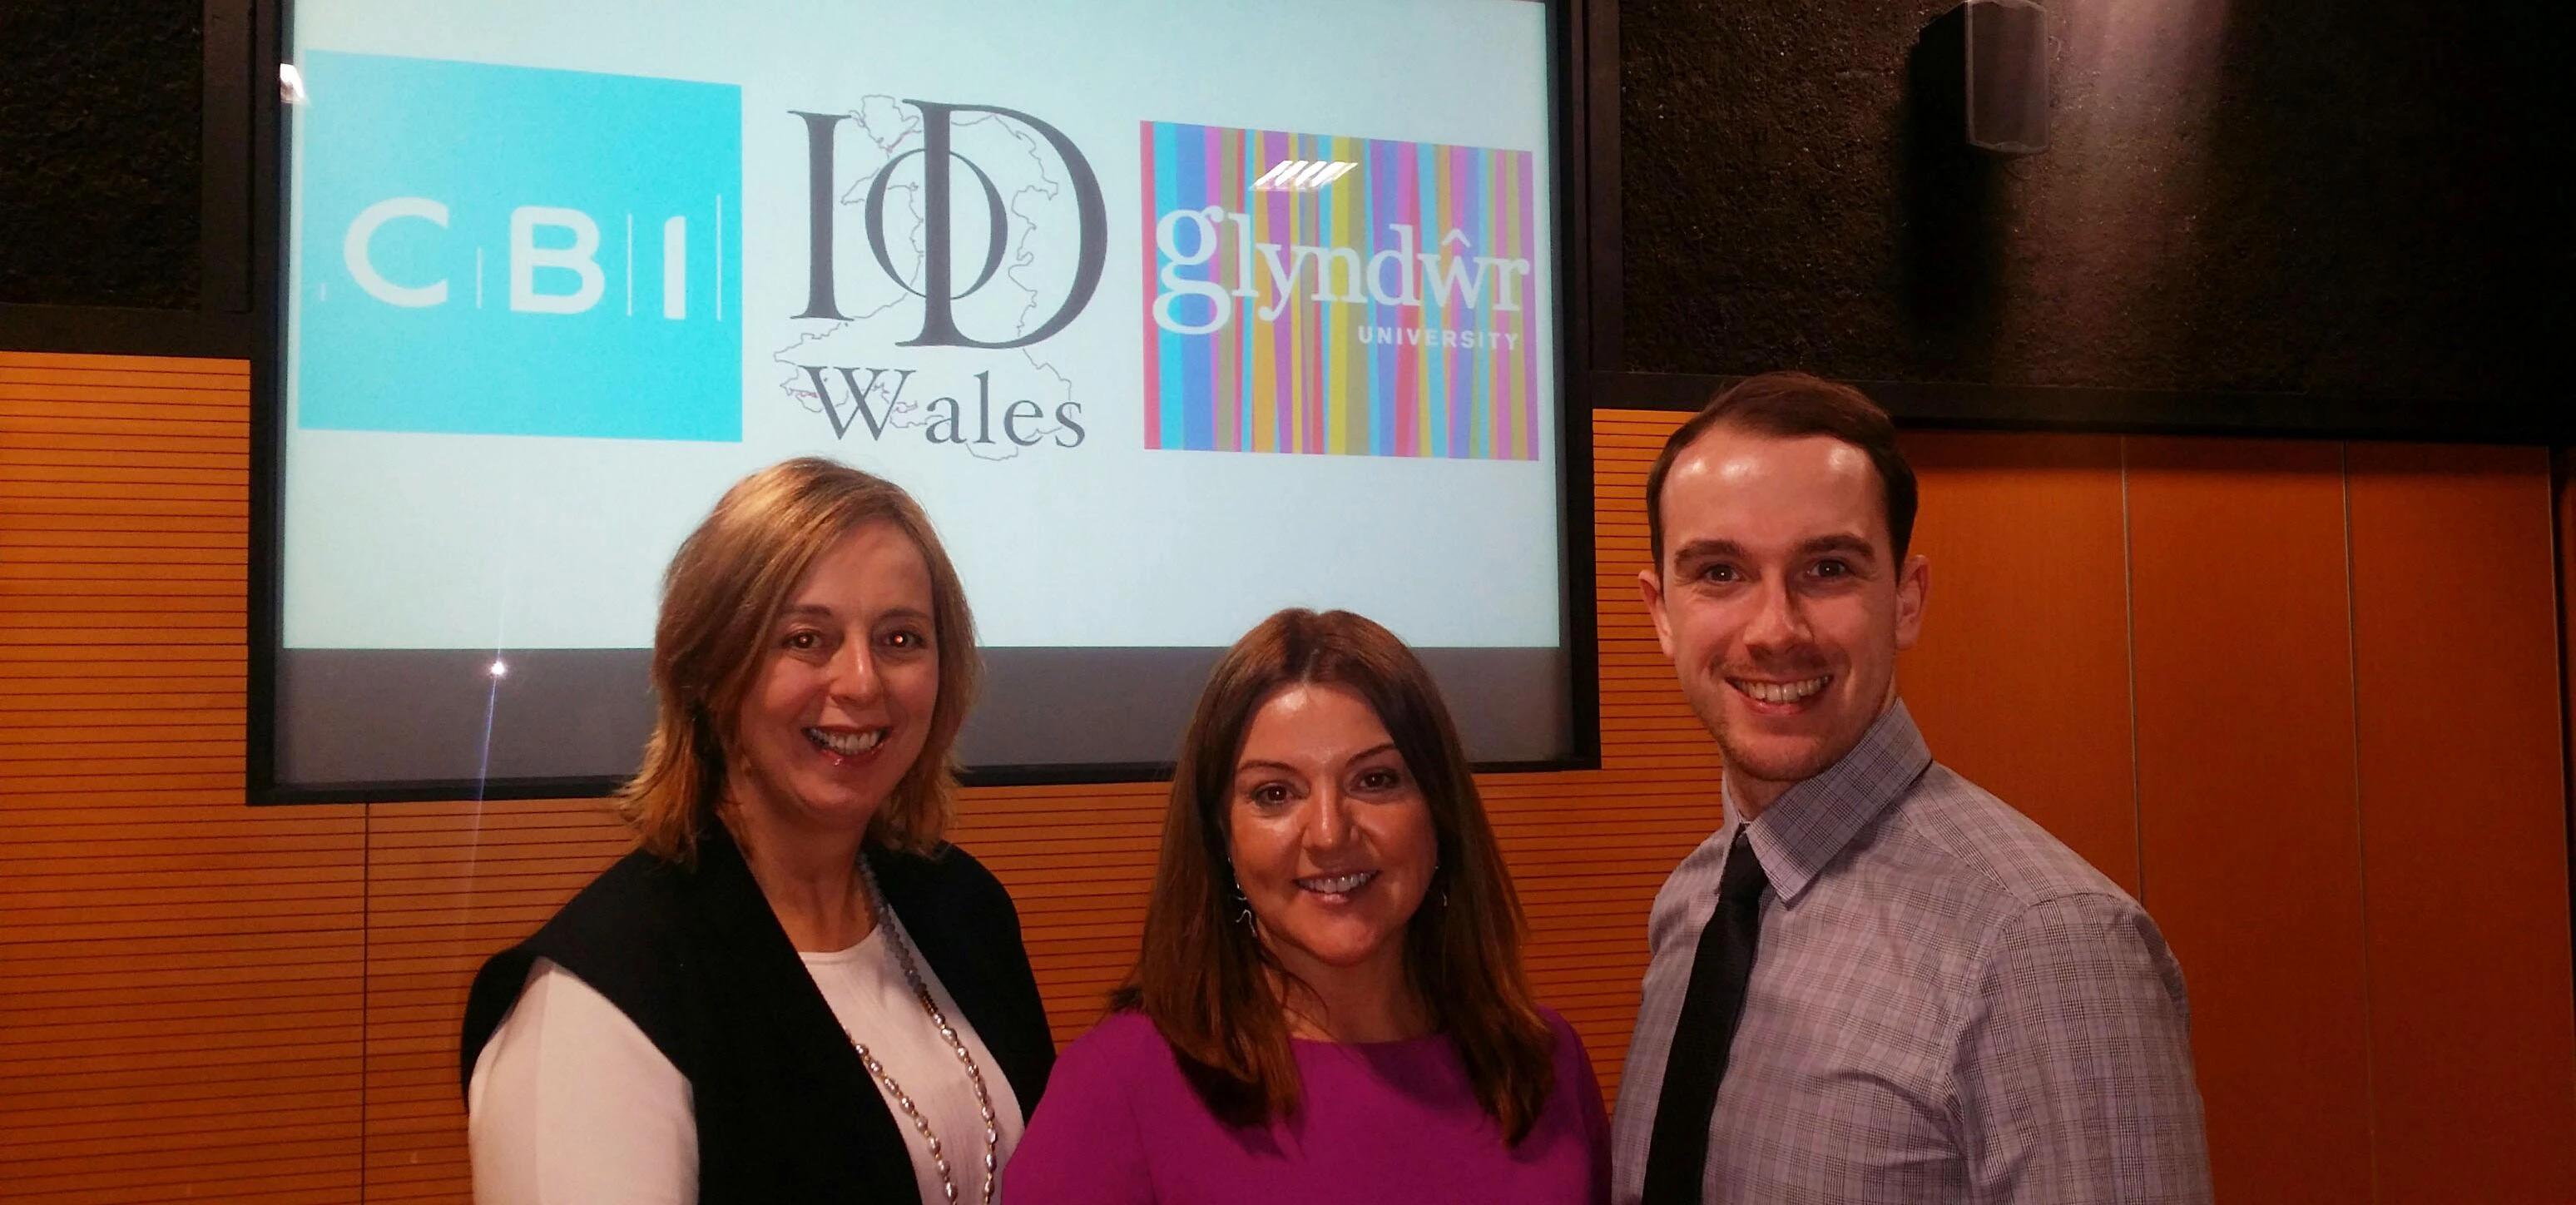 Tracy North, chair of CBI North Wales, Carole Green, ITV Wales business correspondent, and Anthony B